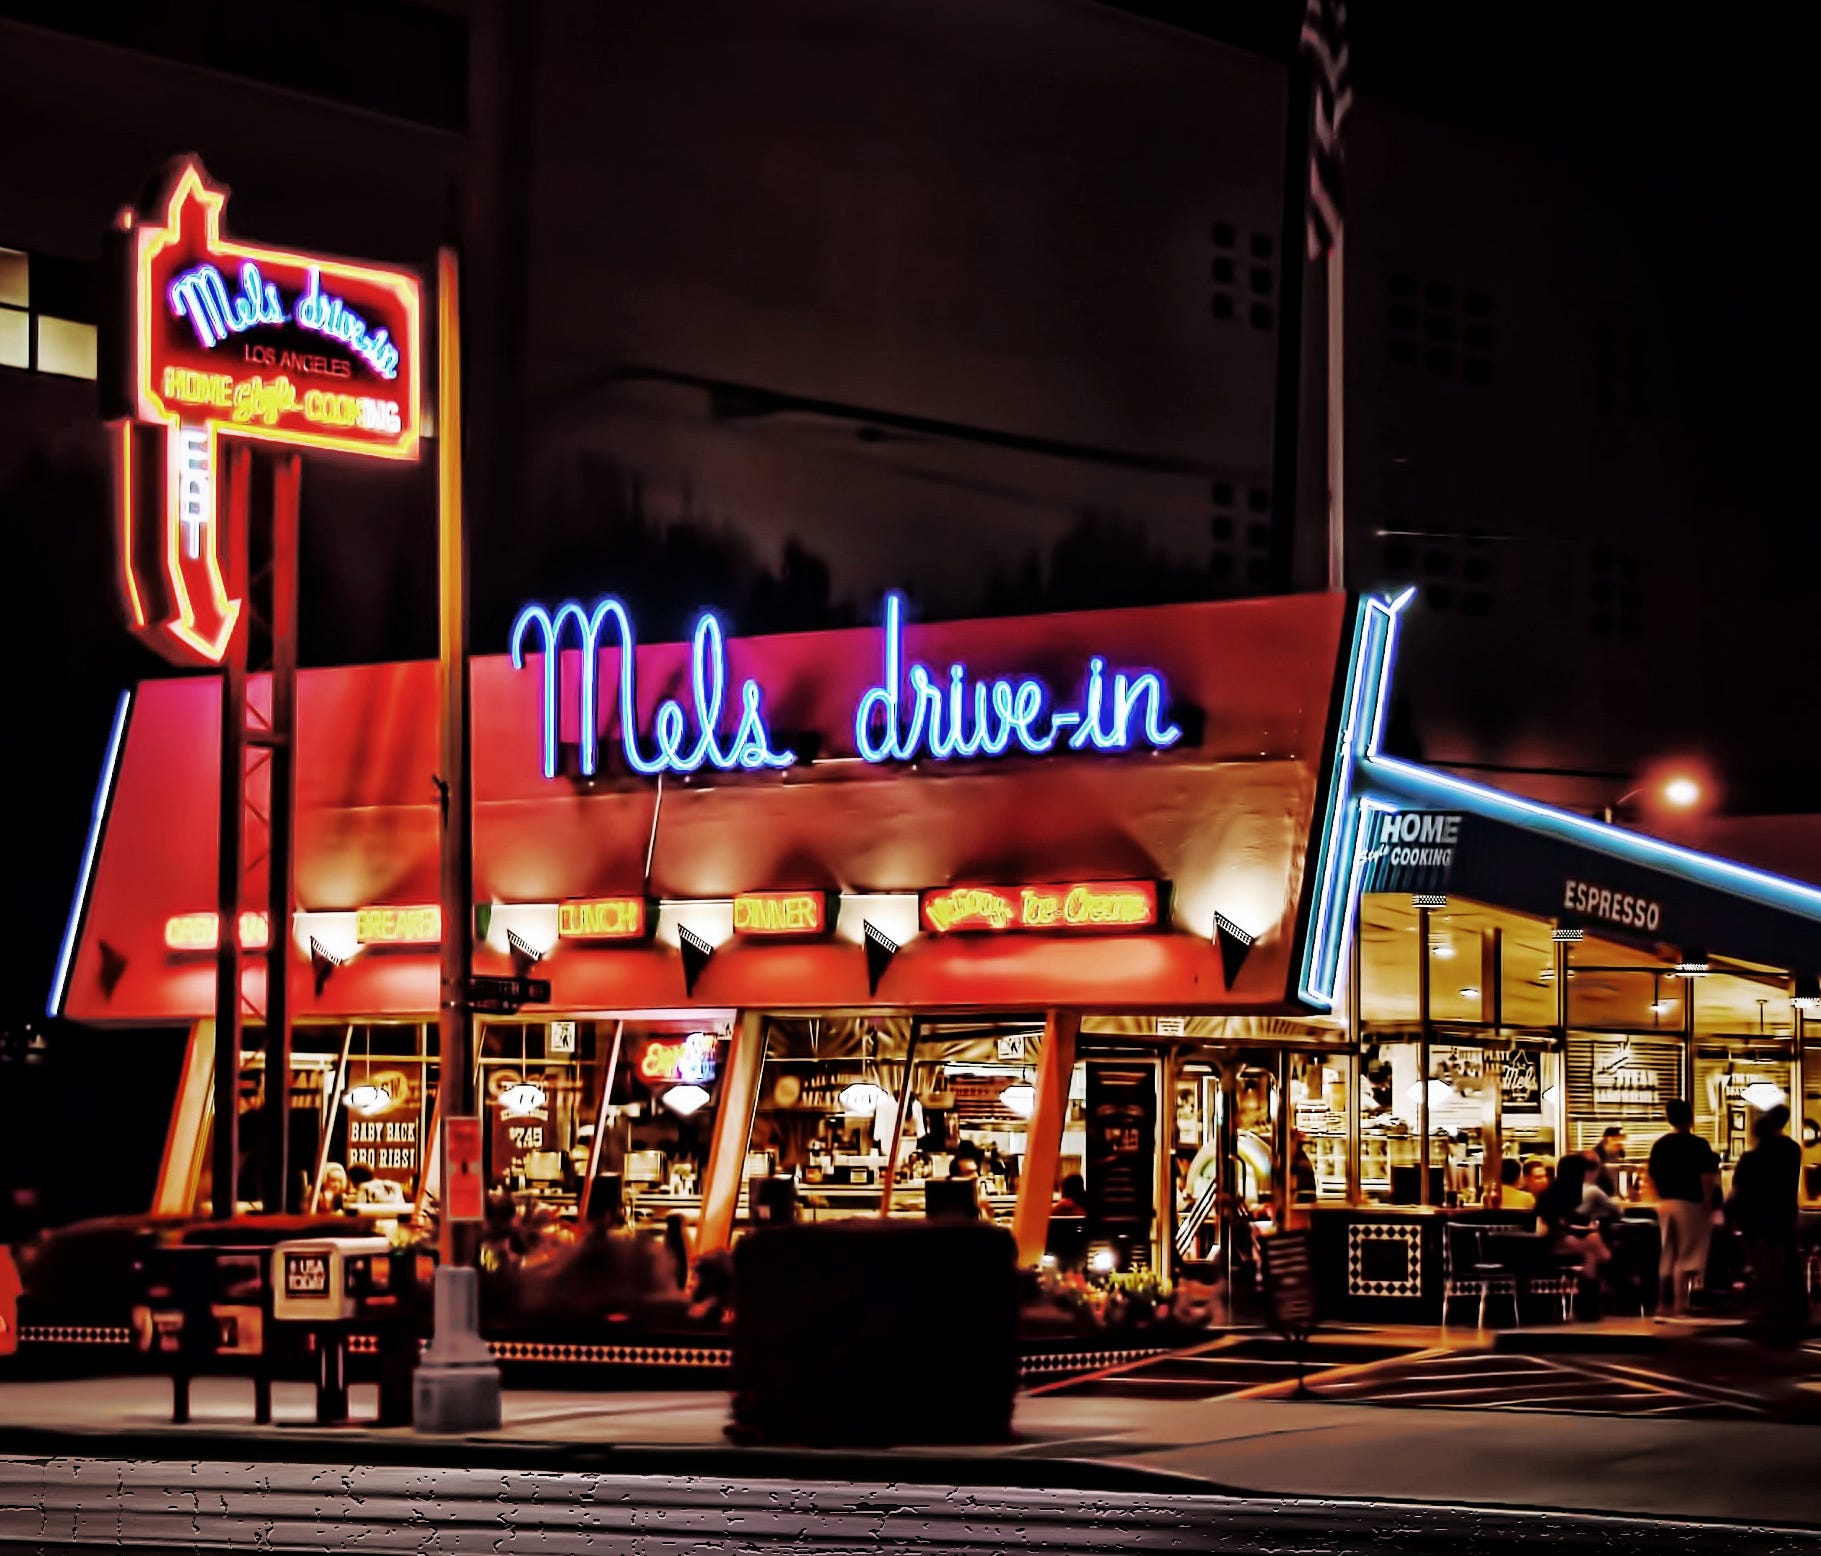 Armet and Davis designed the 1953 building that would house Kerry's Coffee Shop in Sherman Oaks for many years. Now home to a Mel's Drive-In restaurant, the building is one of the few remaining Googie-style coffee shops in the San Fernando Valley.